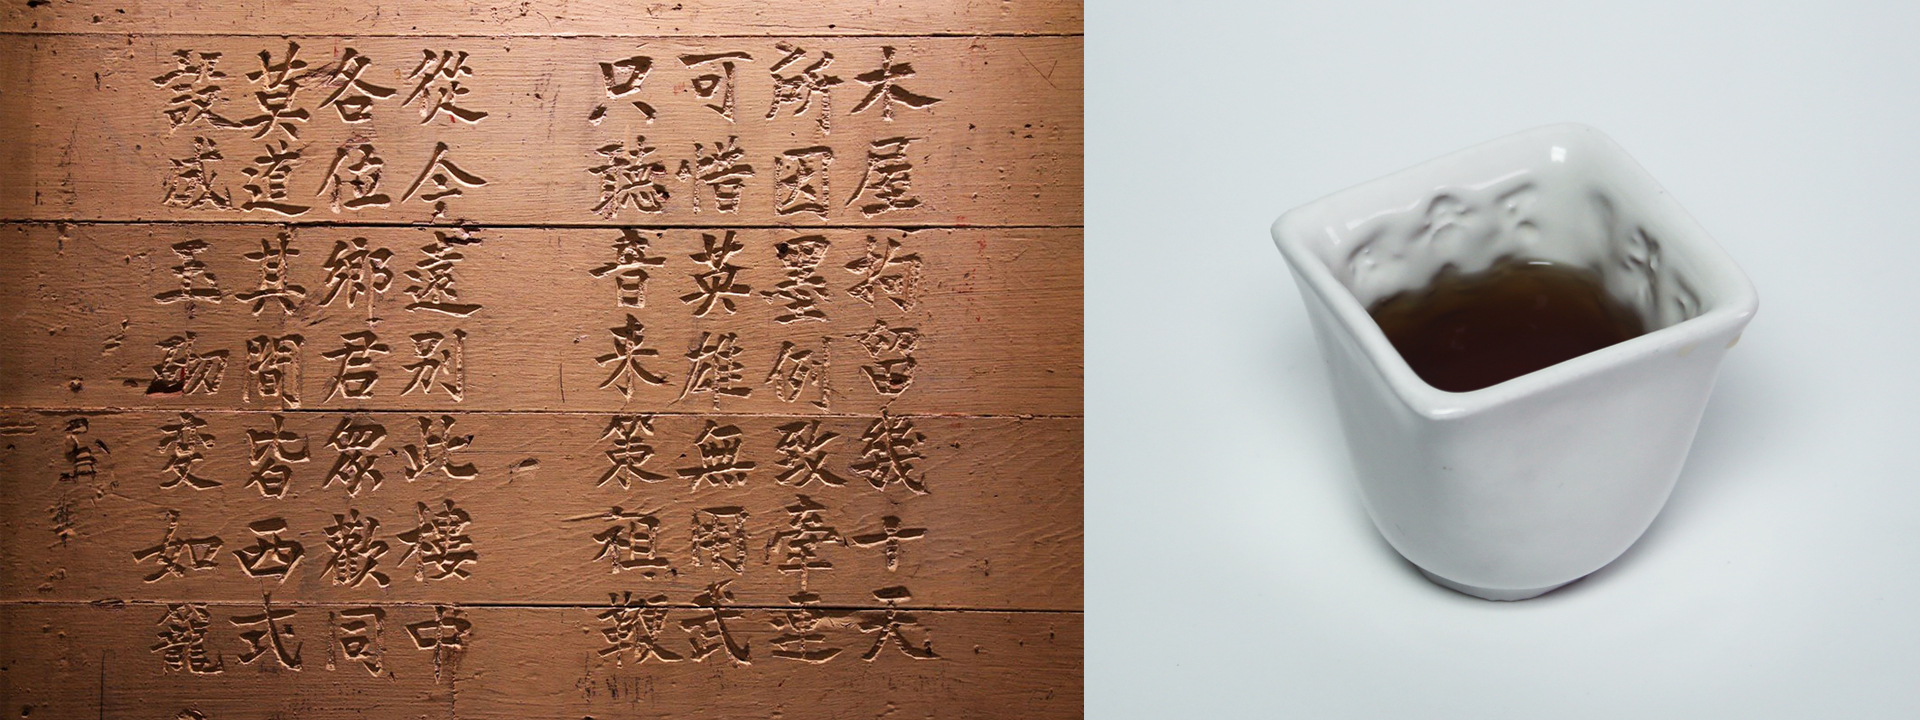 On left, a poem carved on the walls of Angel Island. On right, tea cup with poem carved on its interior.